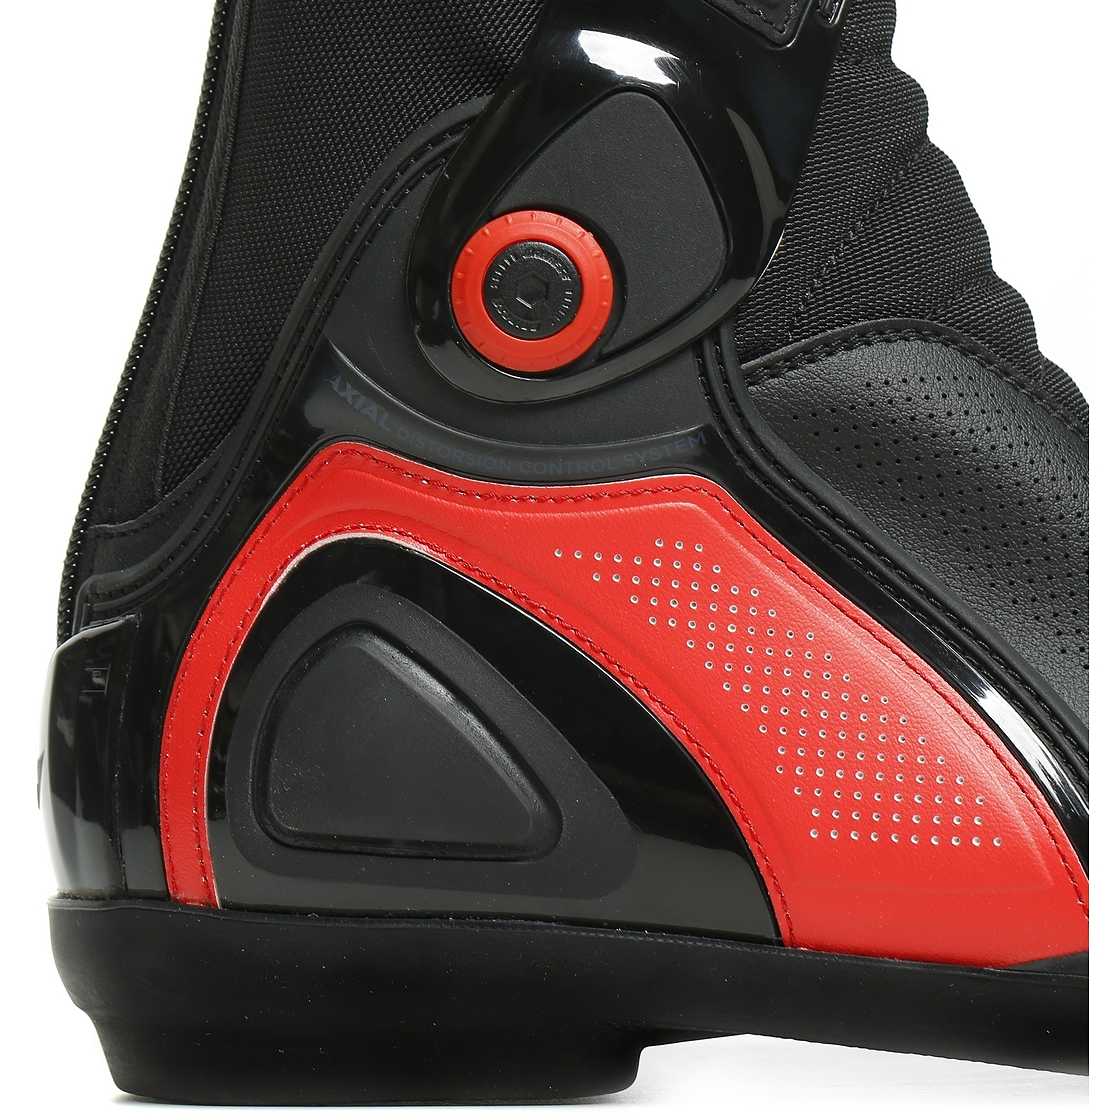 Dainese SPORT GORE-TEX Gore-Tex Motorcycle Black Red Fluo For Sale Online -